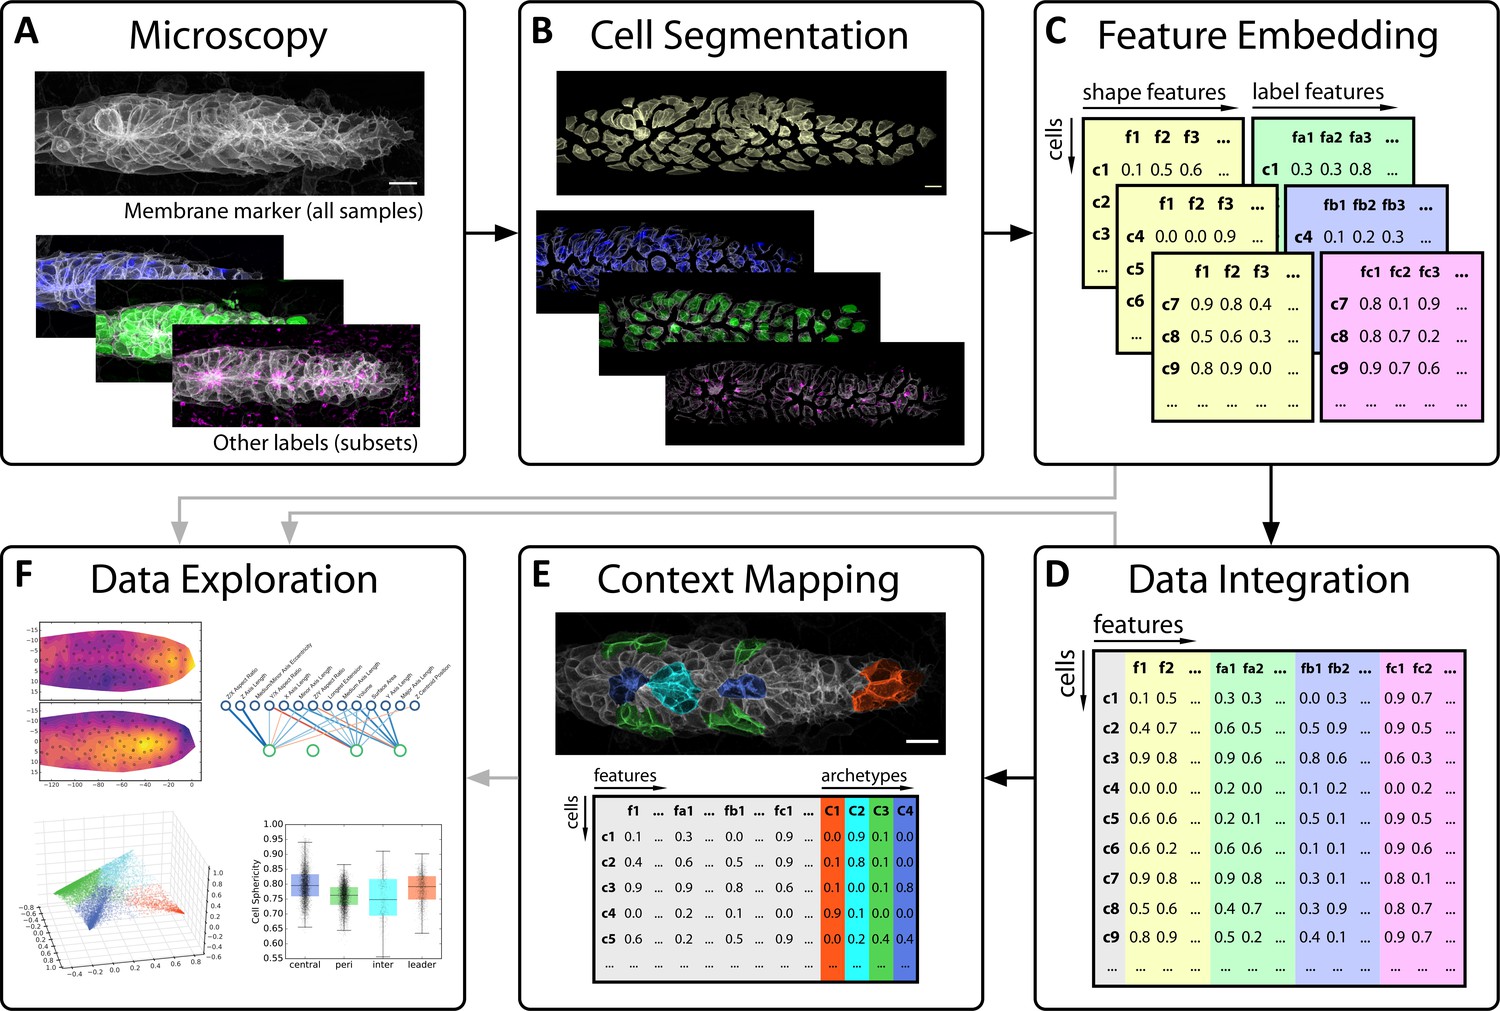 An image-based data-driven analysis of cellular architecture in a 